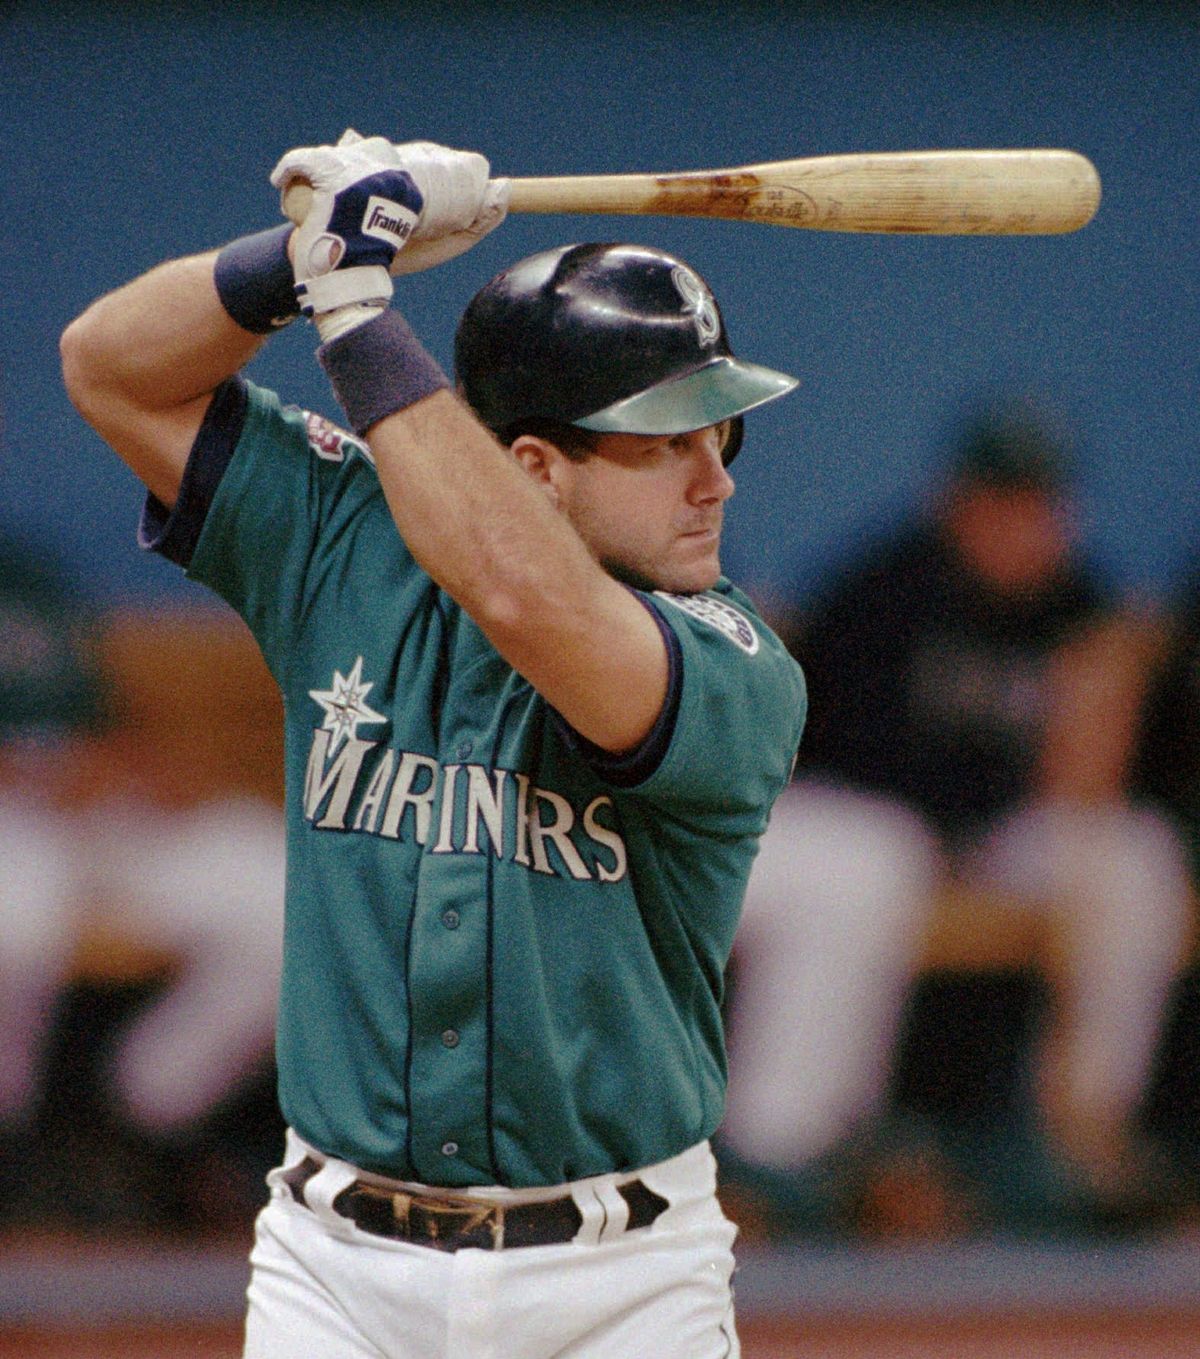 Seattle’s Edgar Martinez fought hamstring problems, but he had four seasons of 46-plus doubles as DH. (Associated Press)